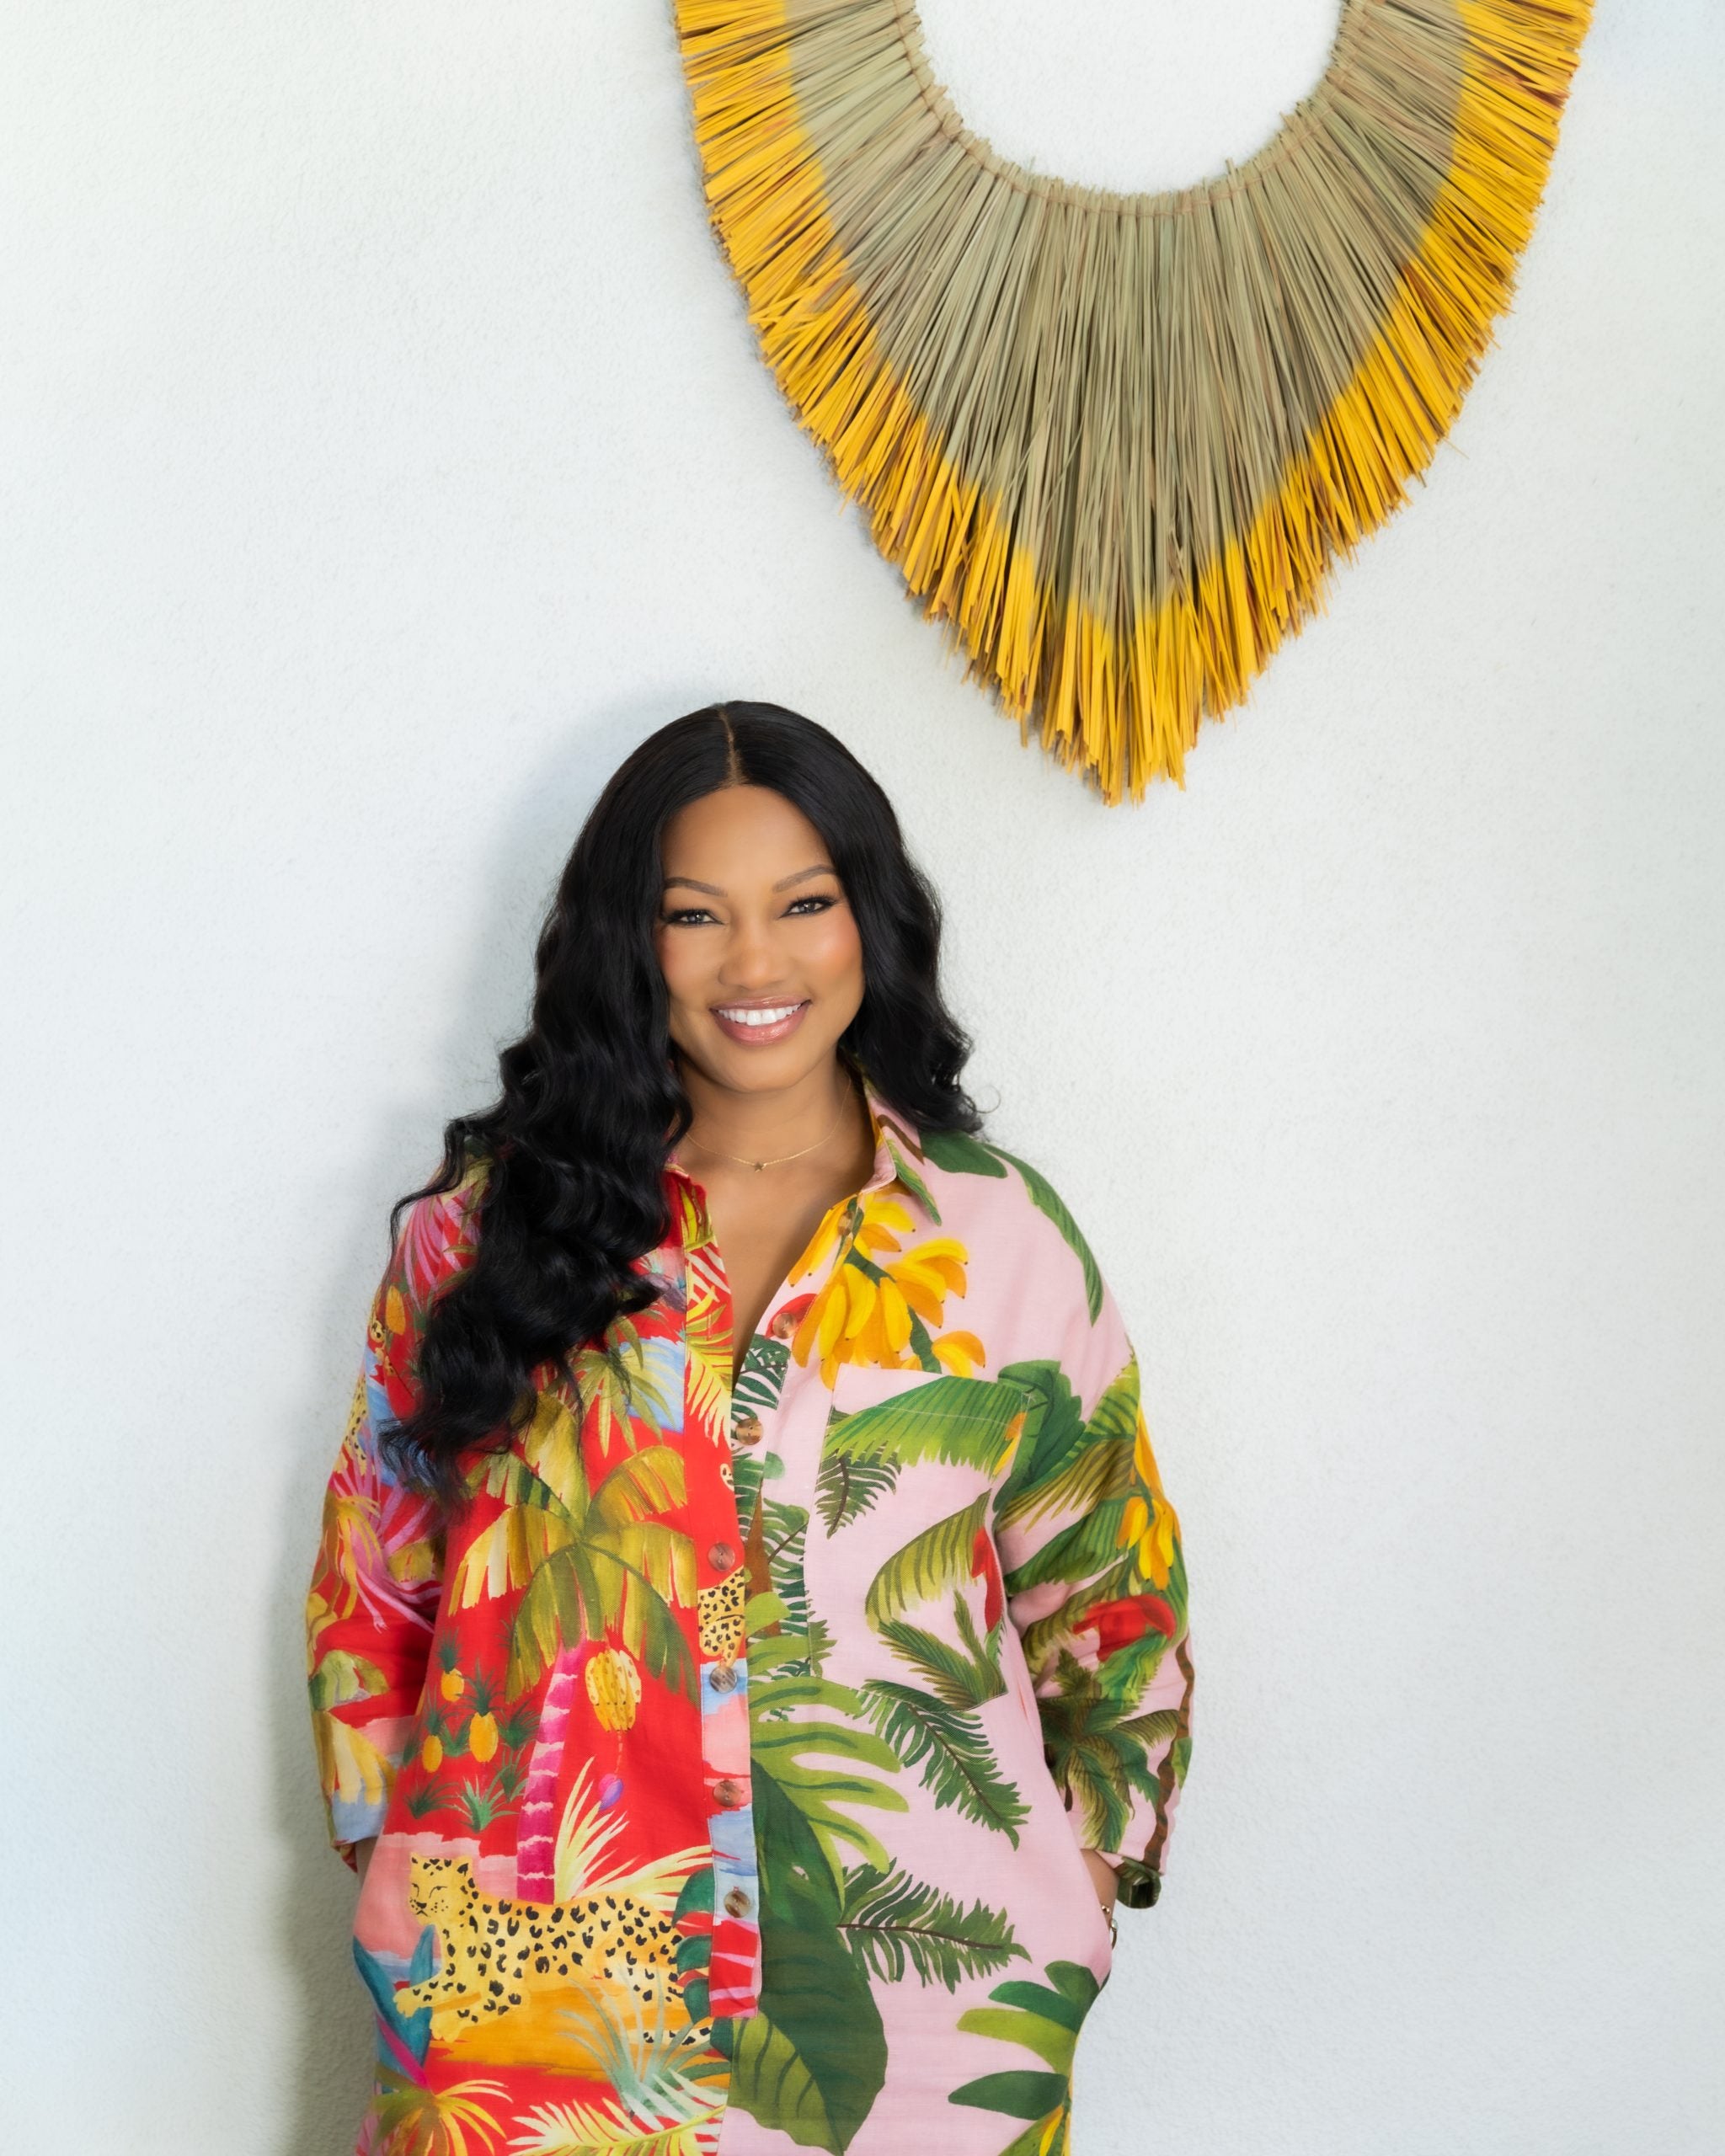 Garcelle Beauvais Just Released A Home Collection With HSN Highlighting Her Haitian Roots